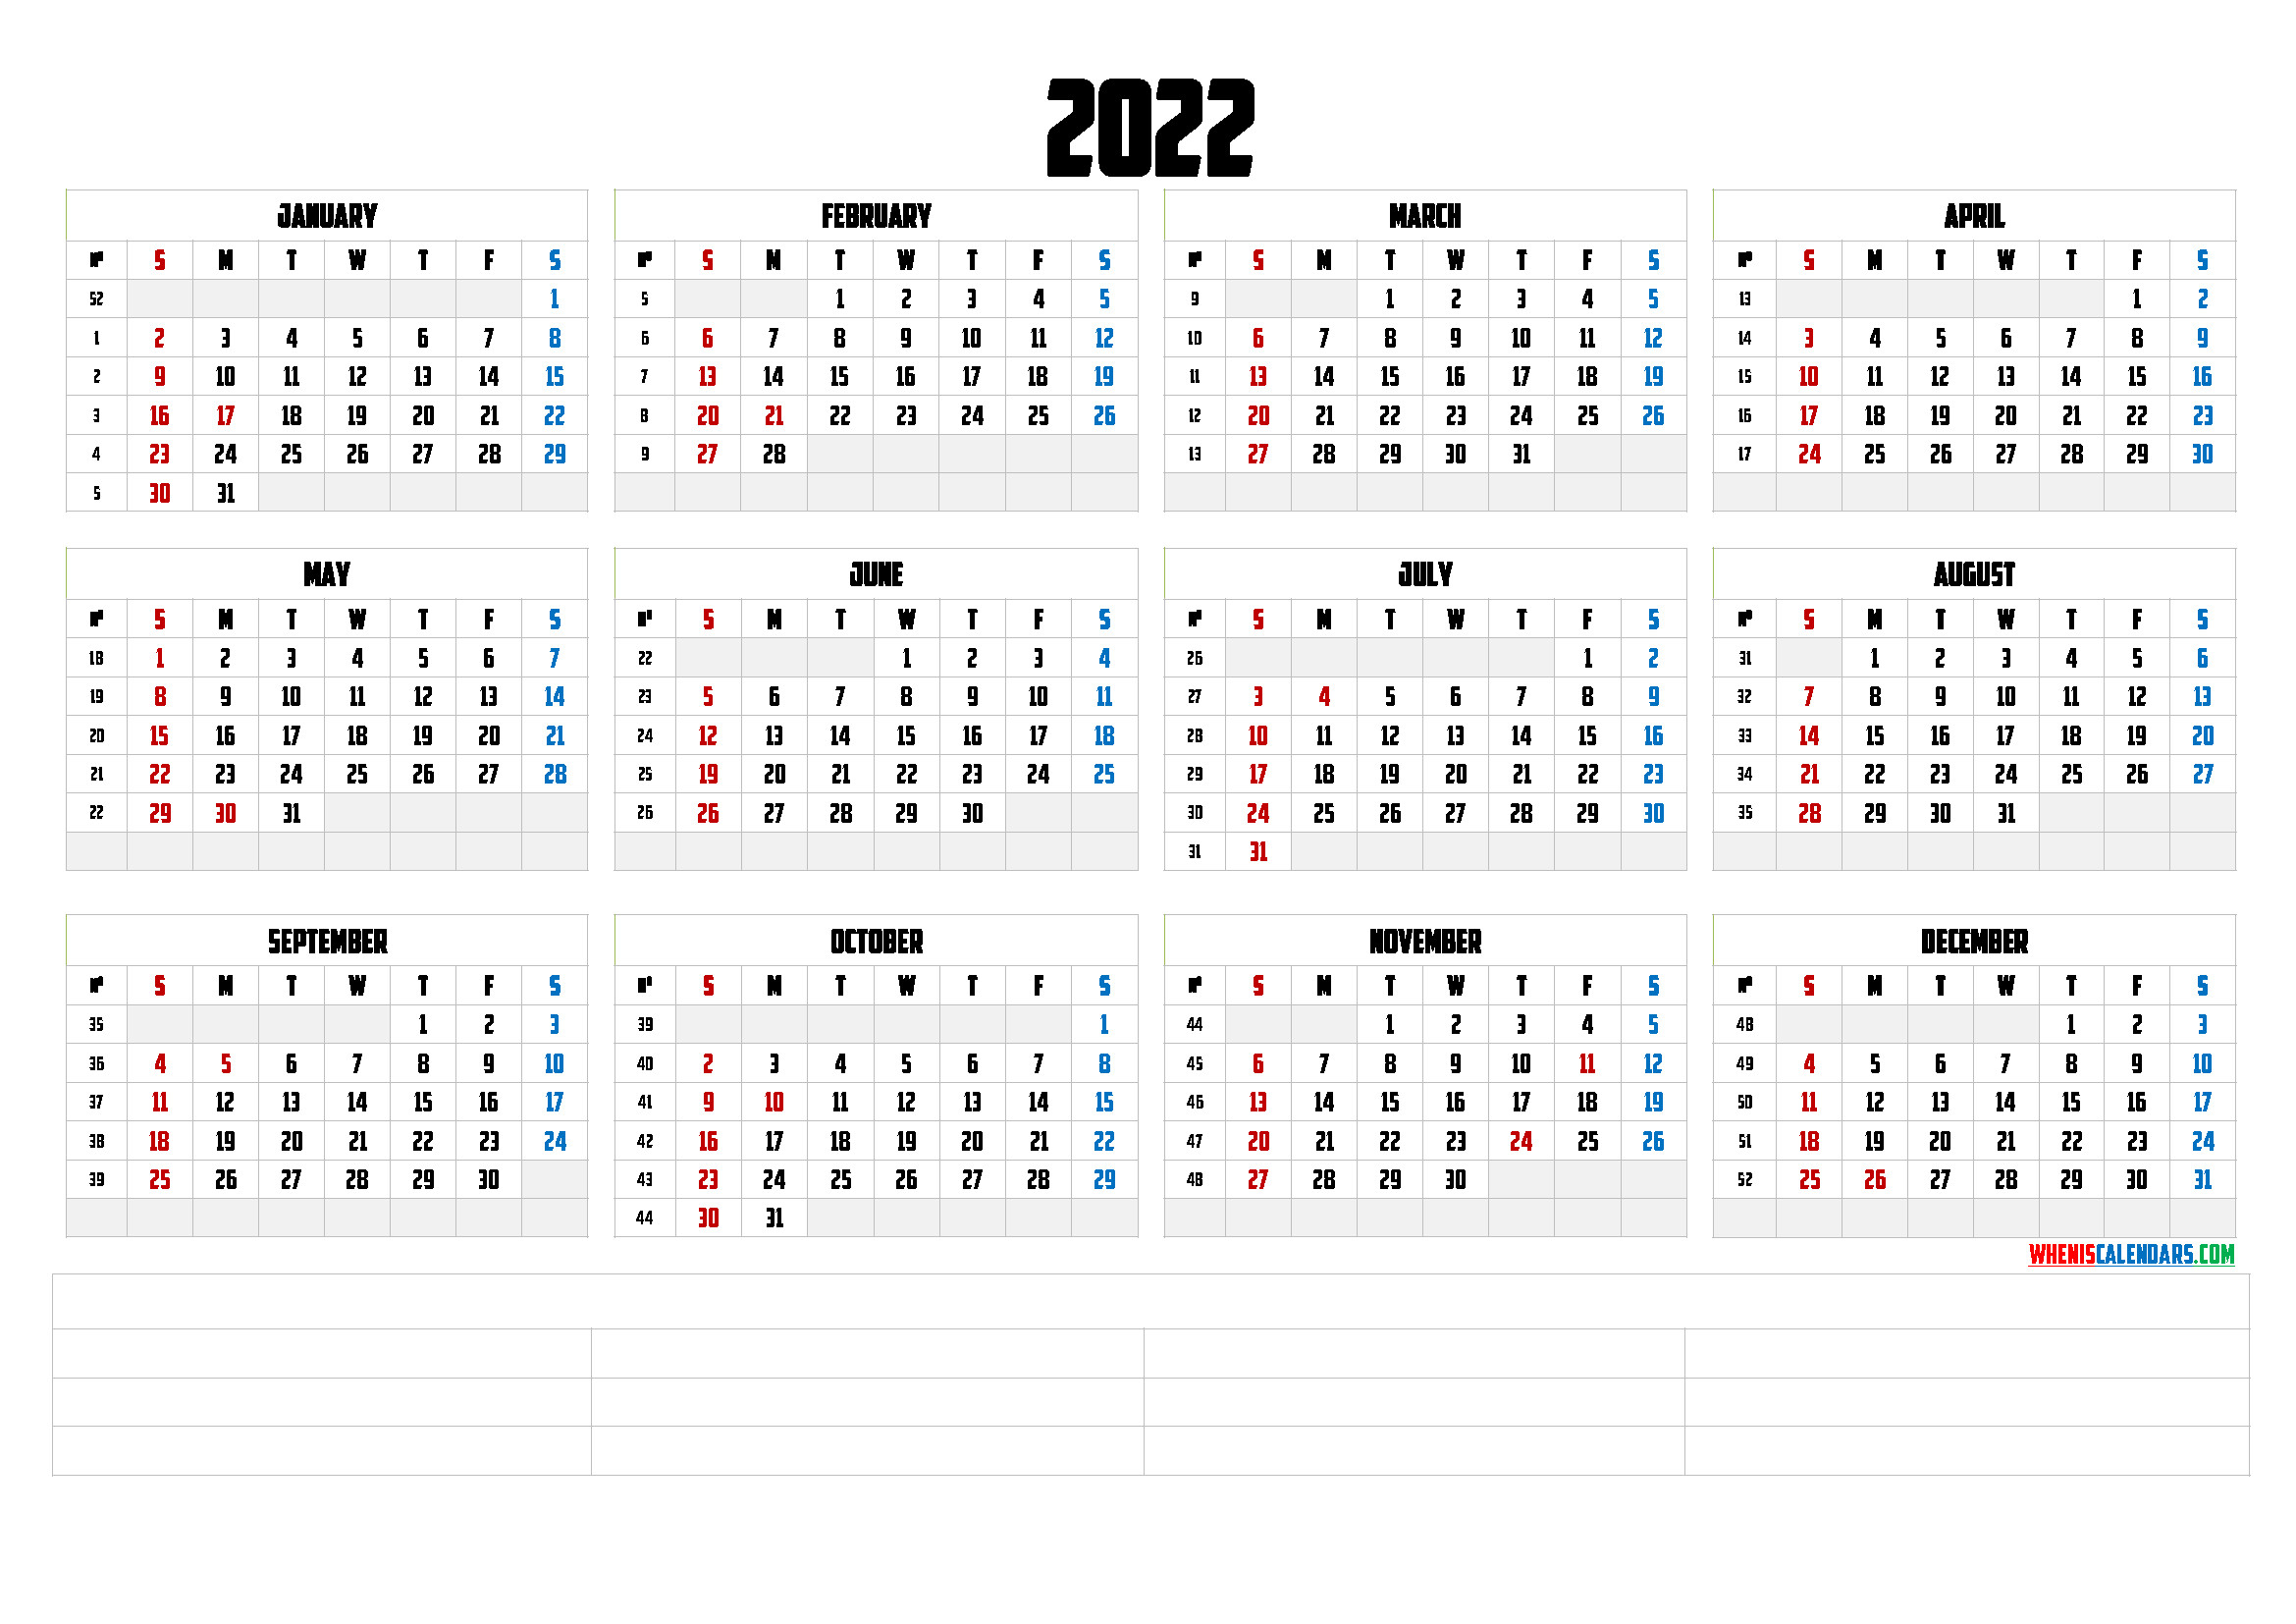 Printable 2022 Yearly Calendar (6 Templates) - Free  Calendar For 2022 With Week Numbers